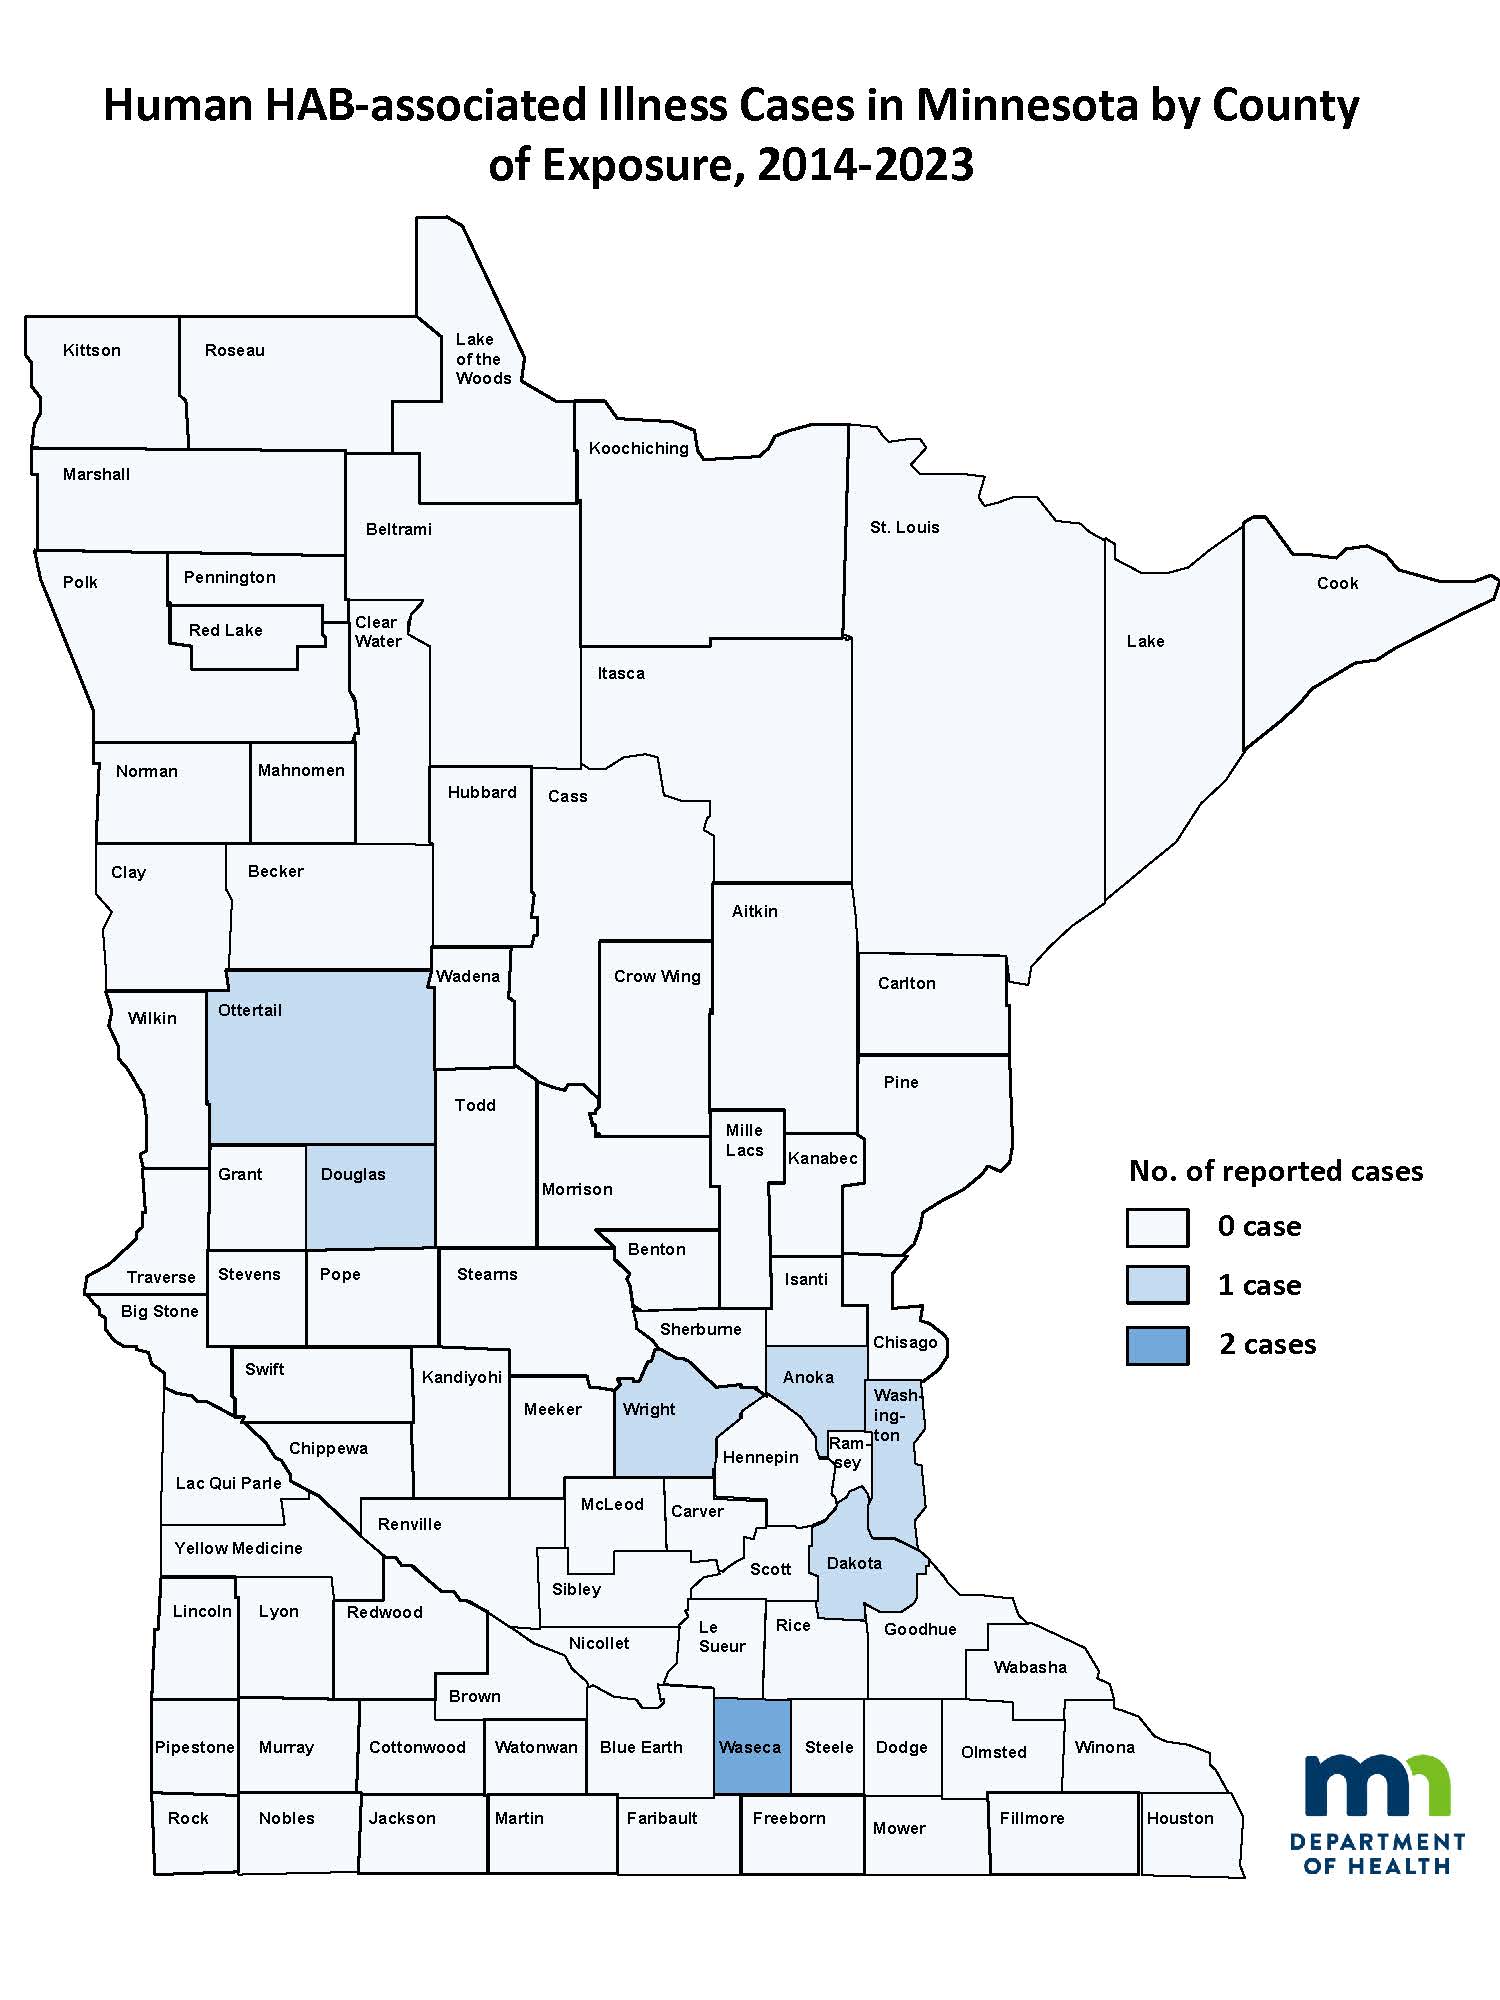 Human HAB-Associated Illness Cases in Minnesota by County of Exposure, 2014-2022